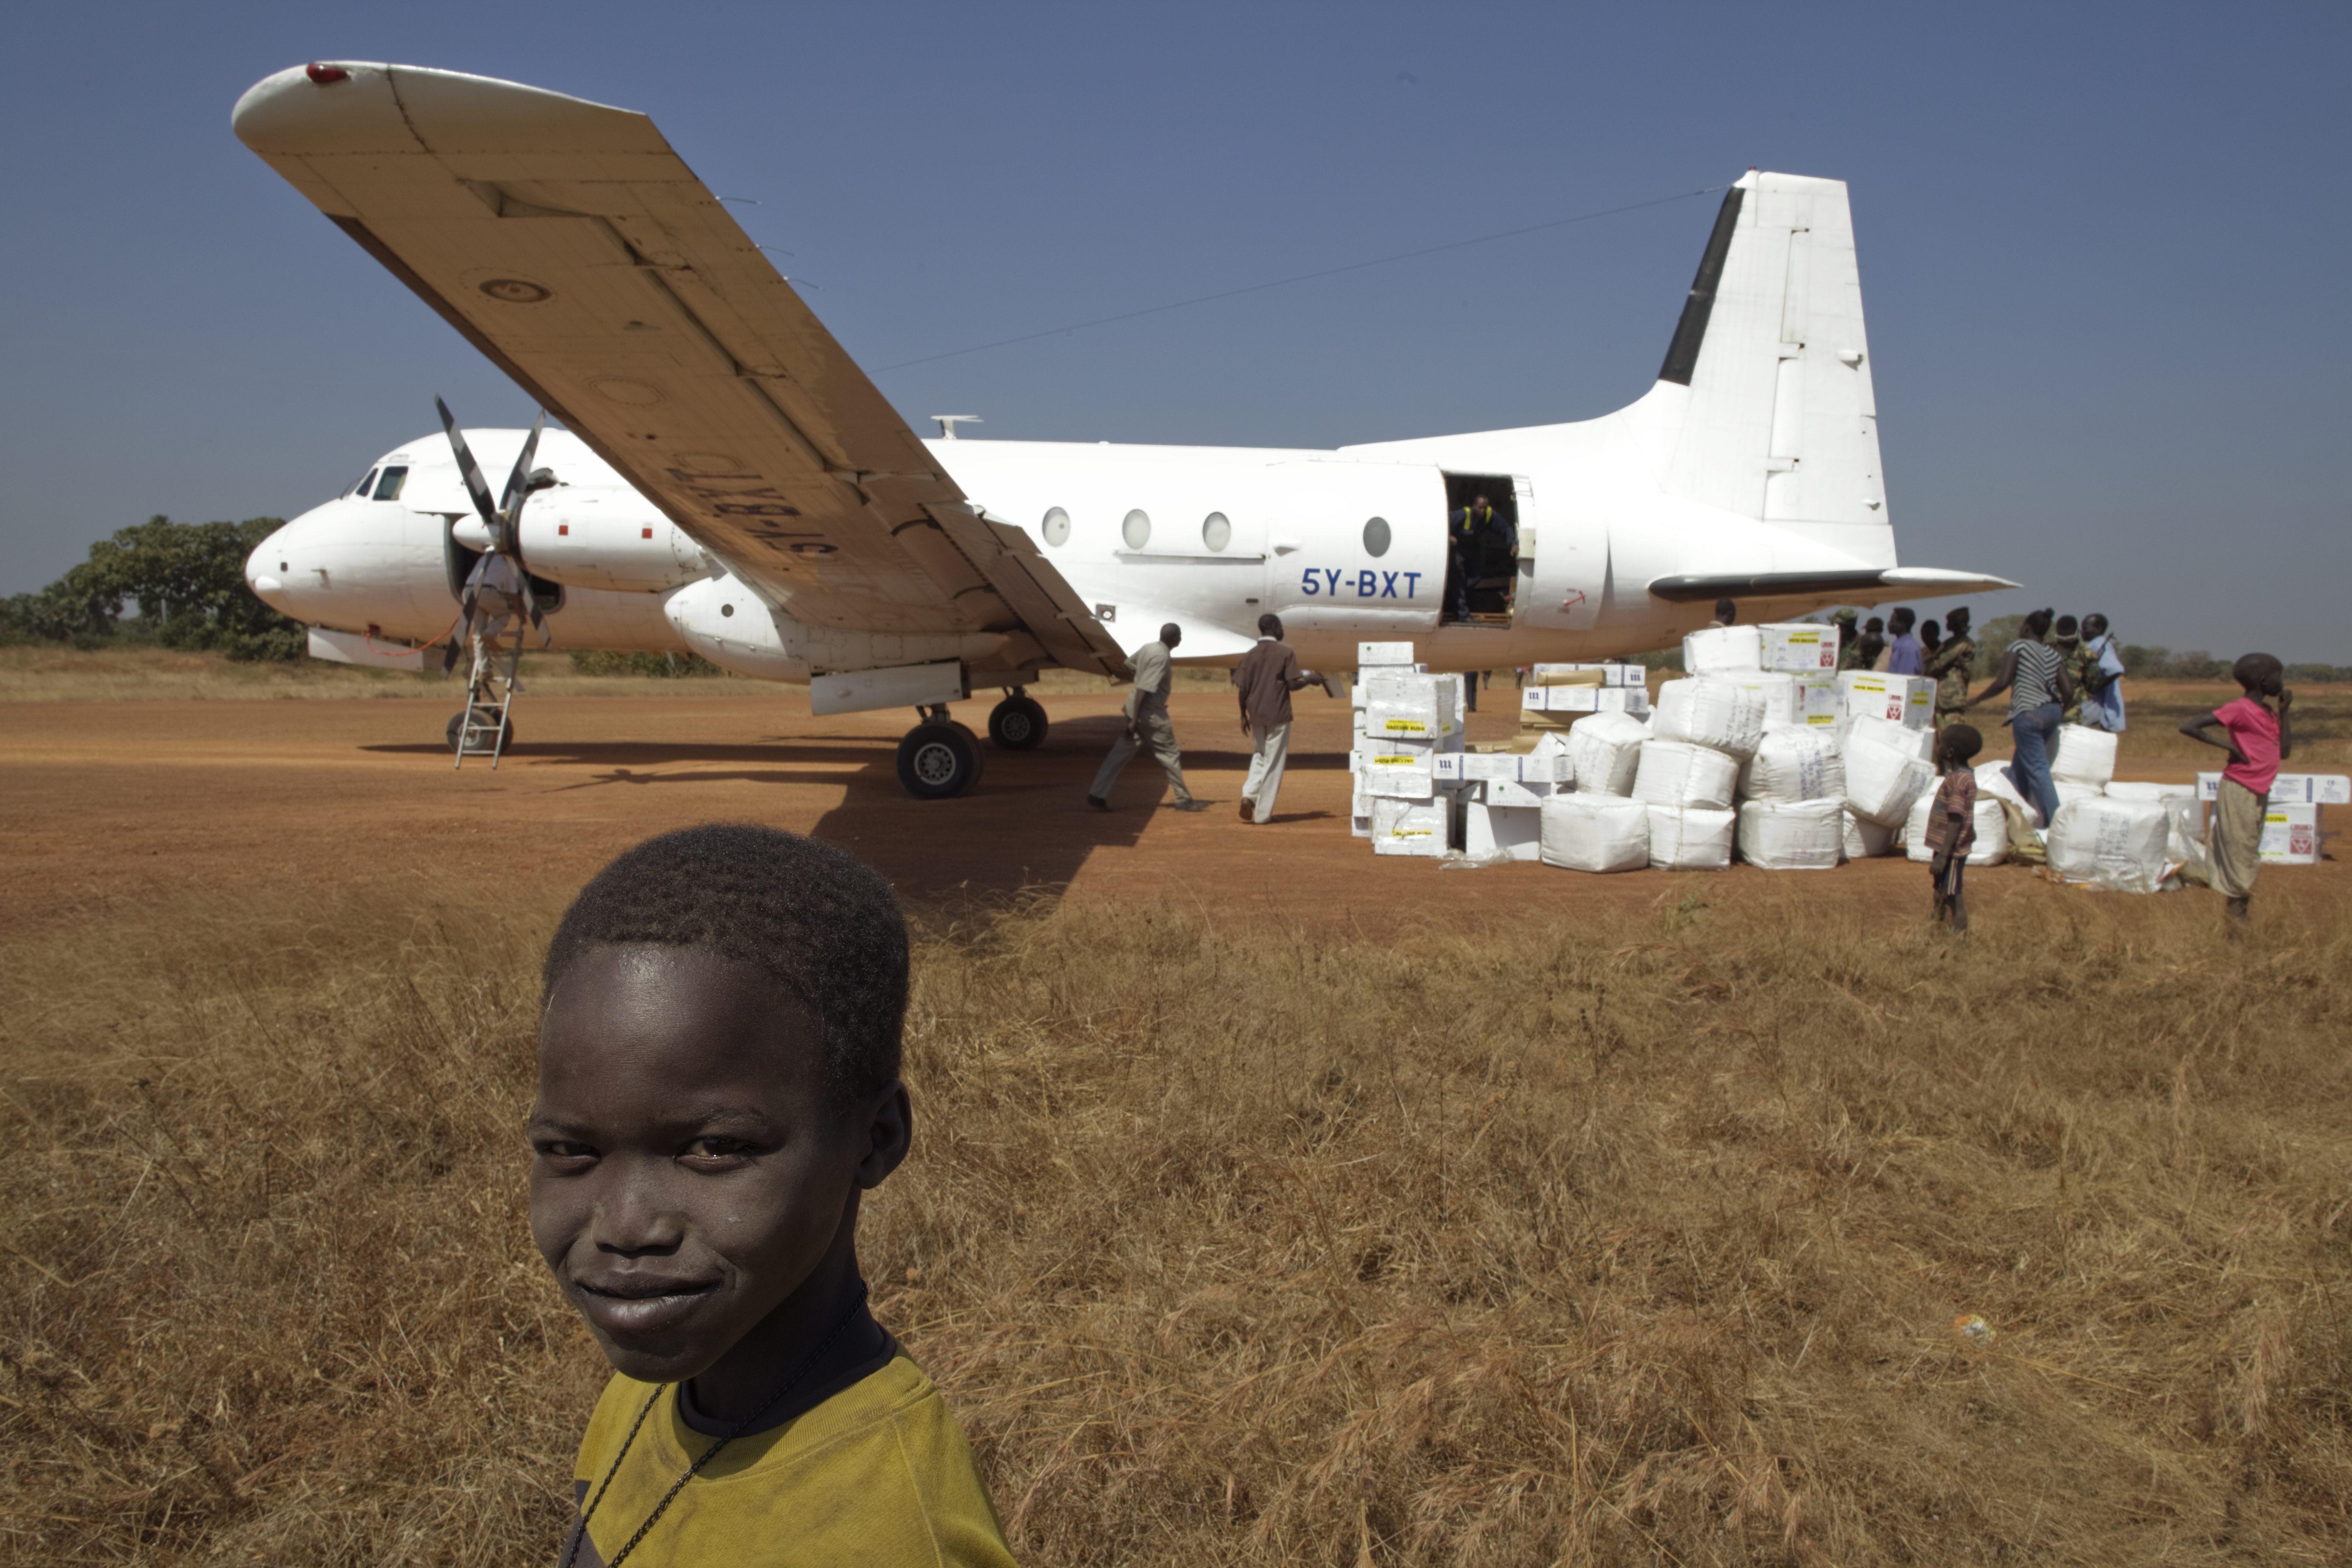 Polio vaccines from a storage facility in Juba, South Sudan, arrive at Aweil Airport. The vaccines travel in insulated shipping containers that keep them at or close to freezing to preserve their potency.  UNI122541 Credit: © UNICEF/NYHQ2011-2453/Sokol